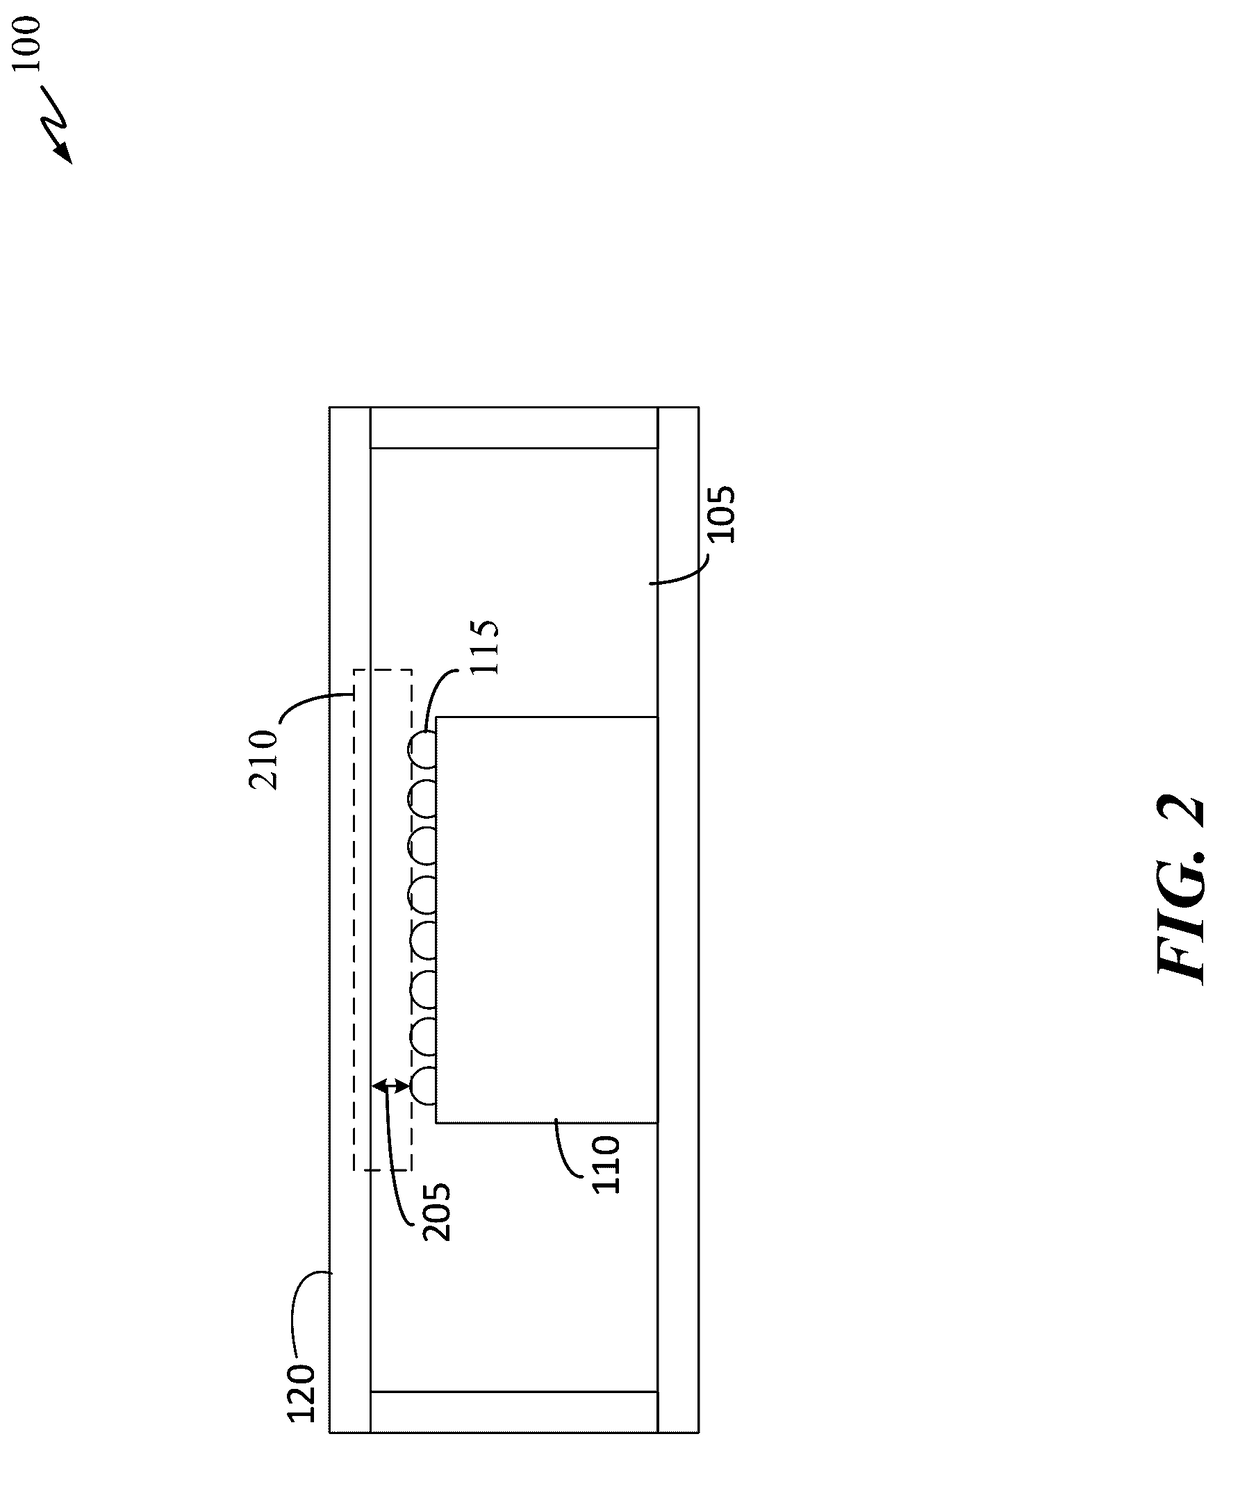 System and method for measuring intraocular pressure